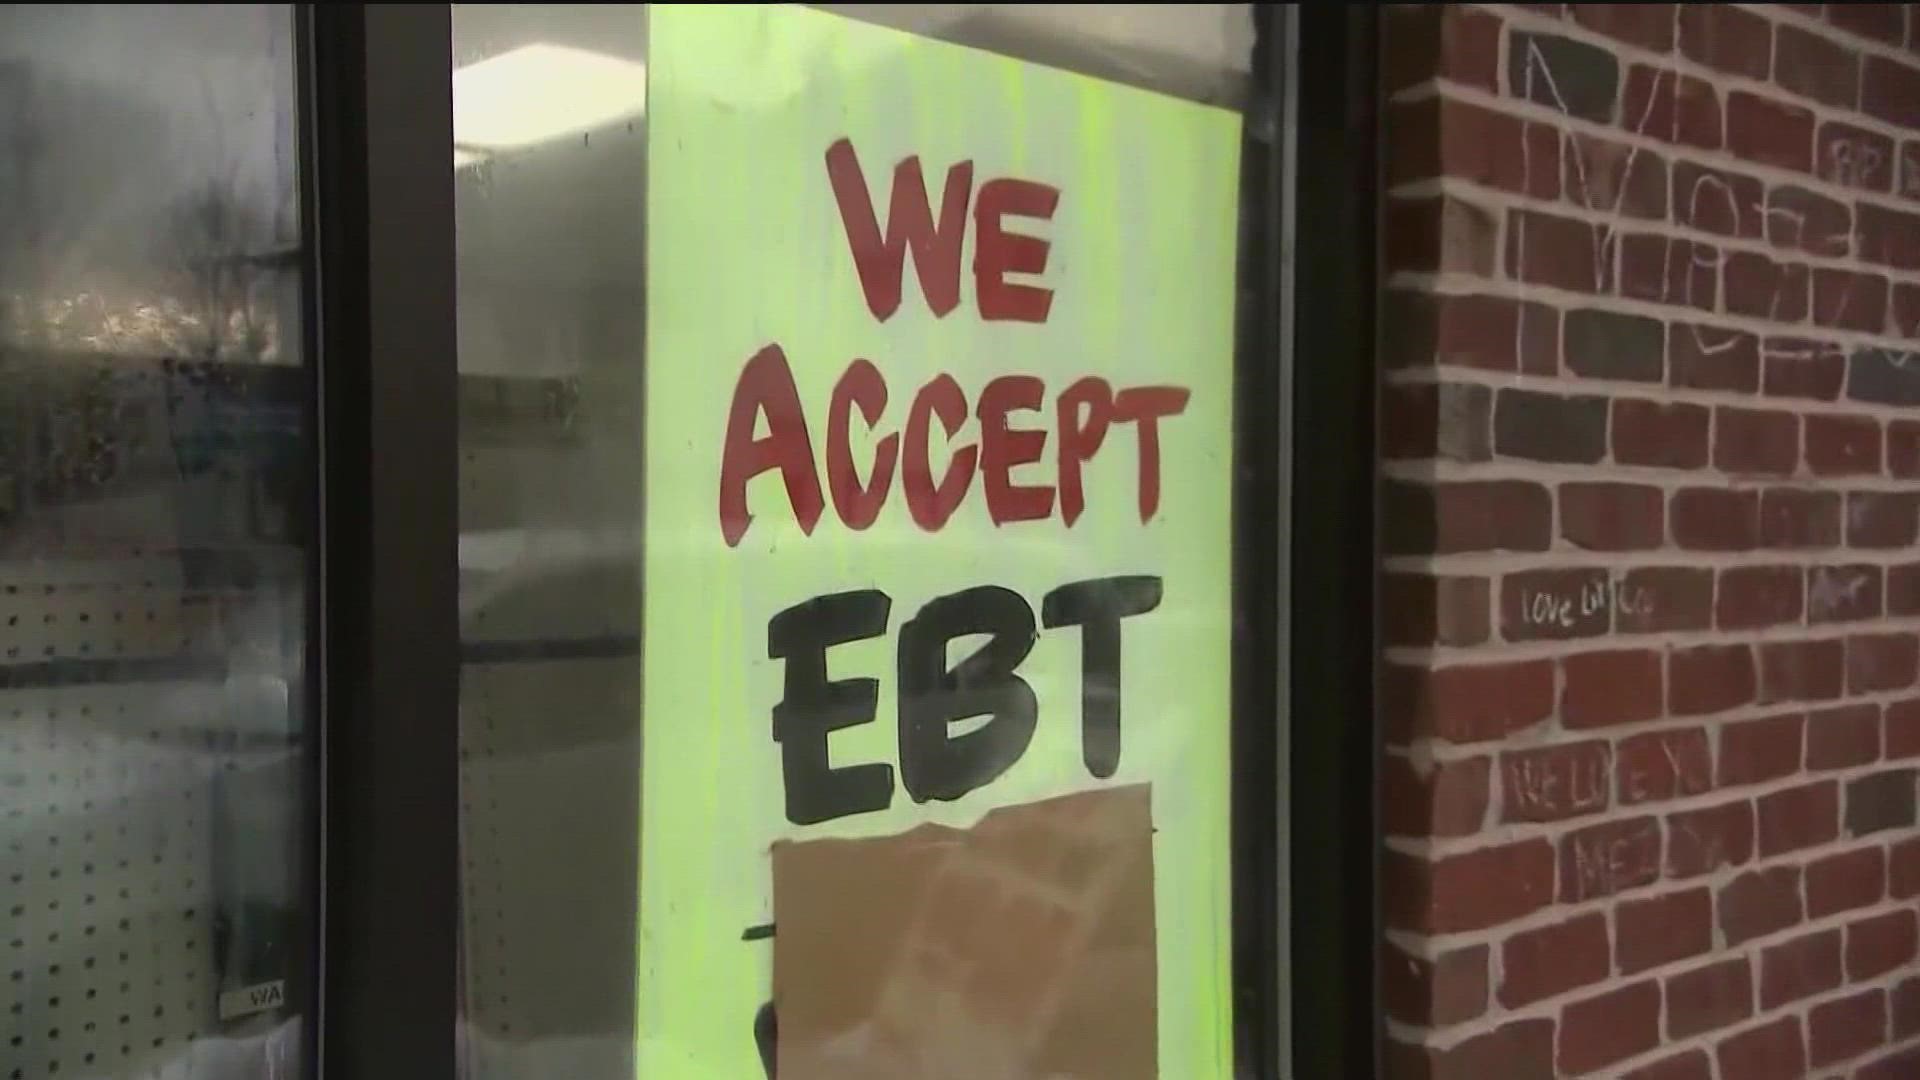 Families using EBT cards, beware, Chula Vista Police Department is warning people over a spike in scams to steal benefits.